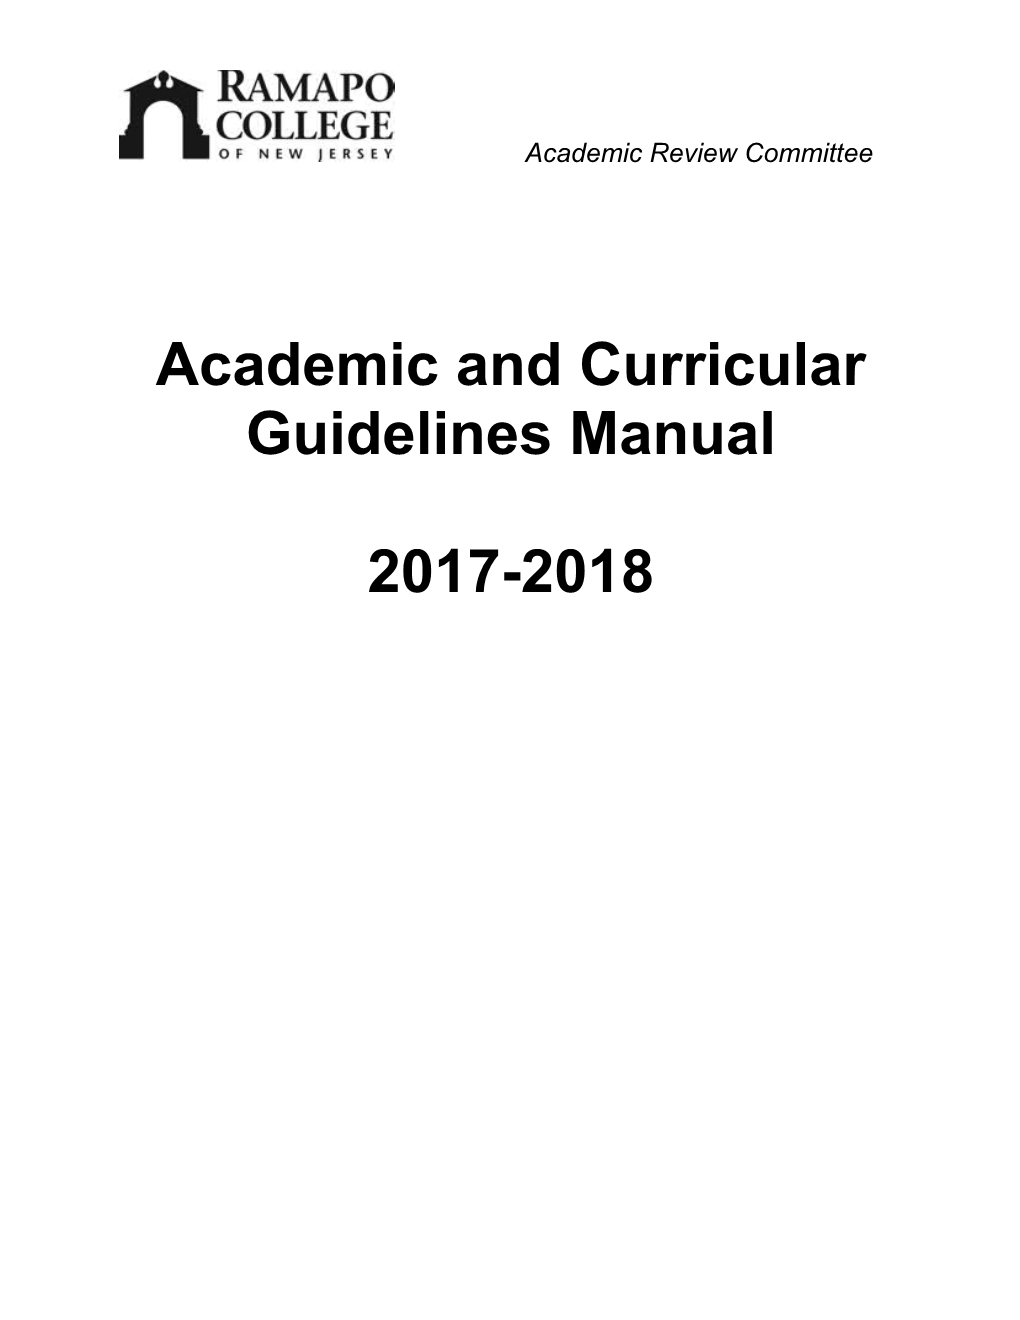 Ramapo College of New Jersey Academic and Curricular Guidelines Manual 2017-2018